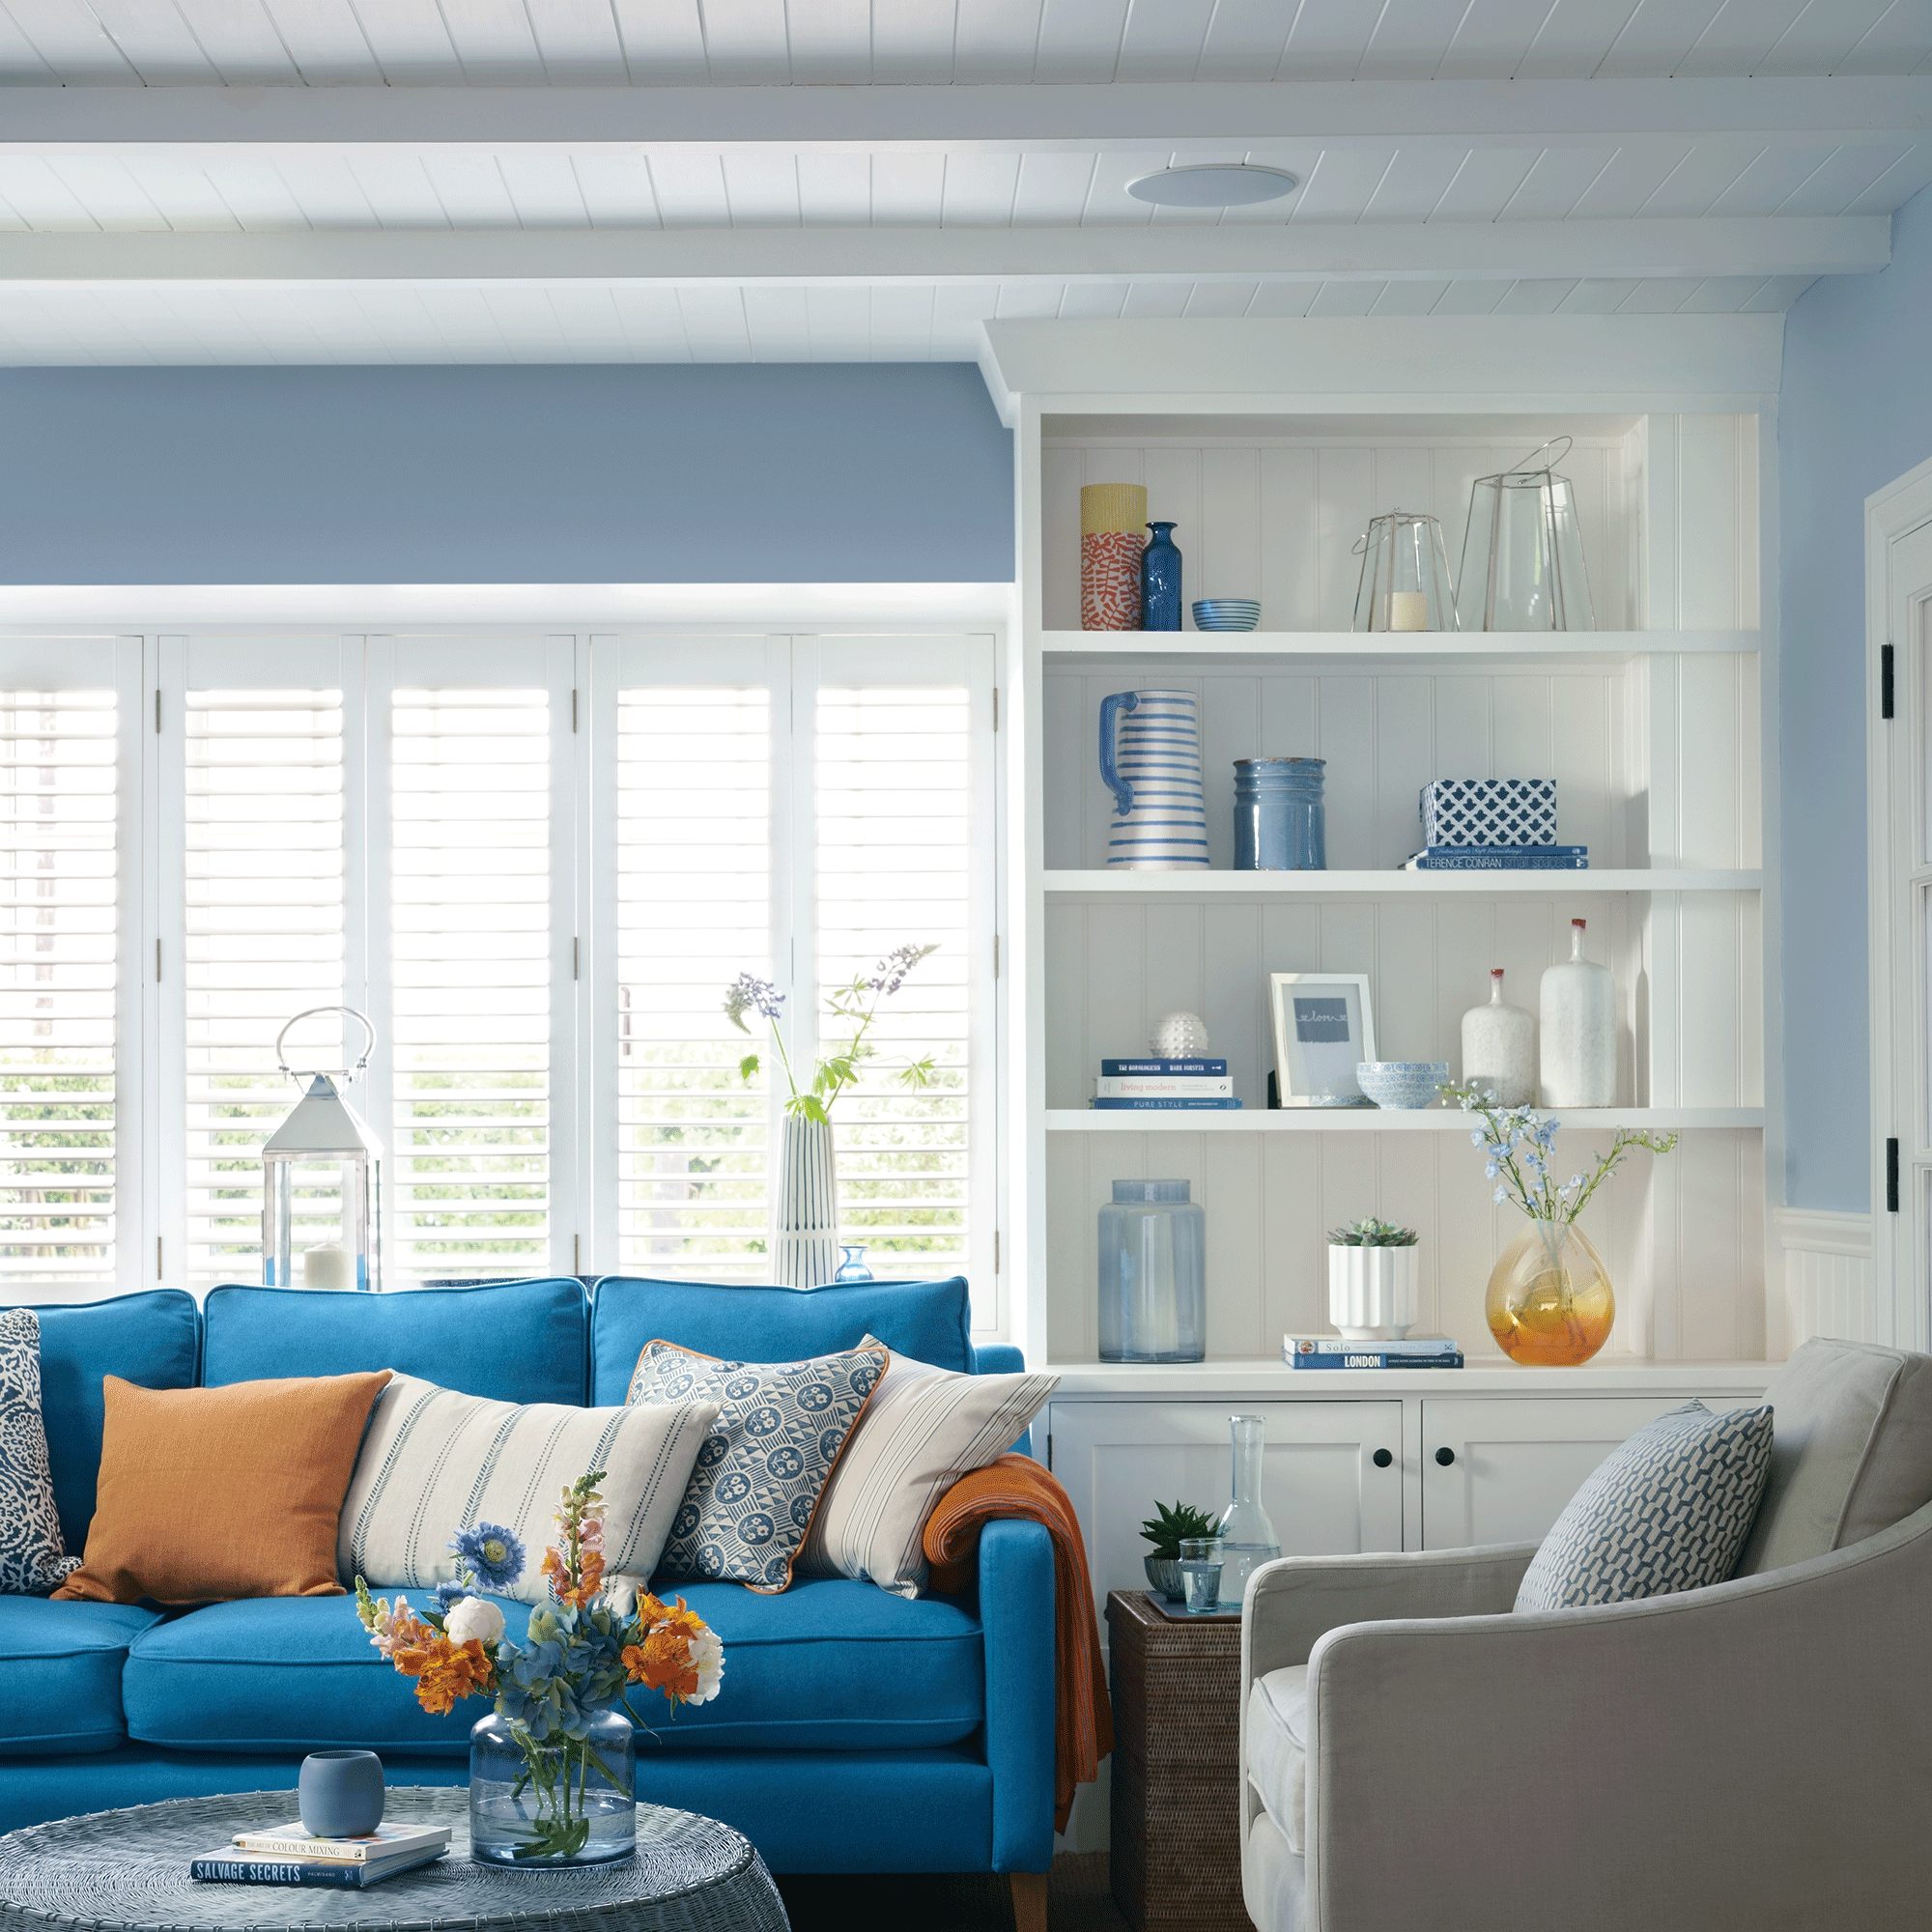 White and blue living room with shiplap ceiling